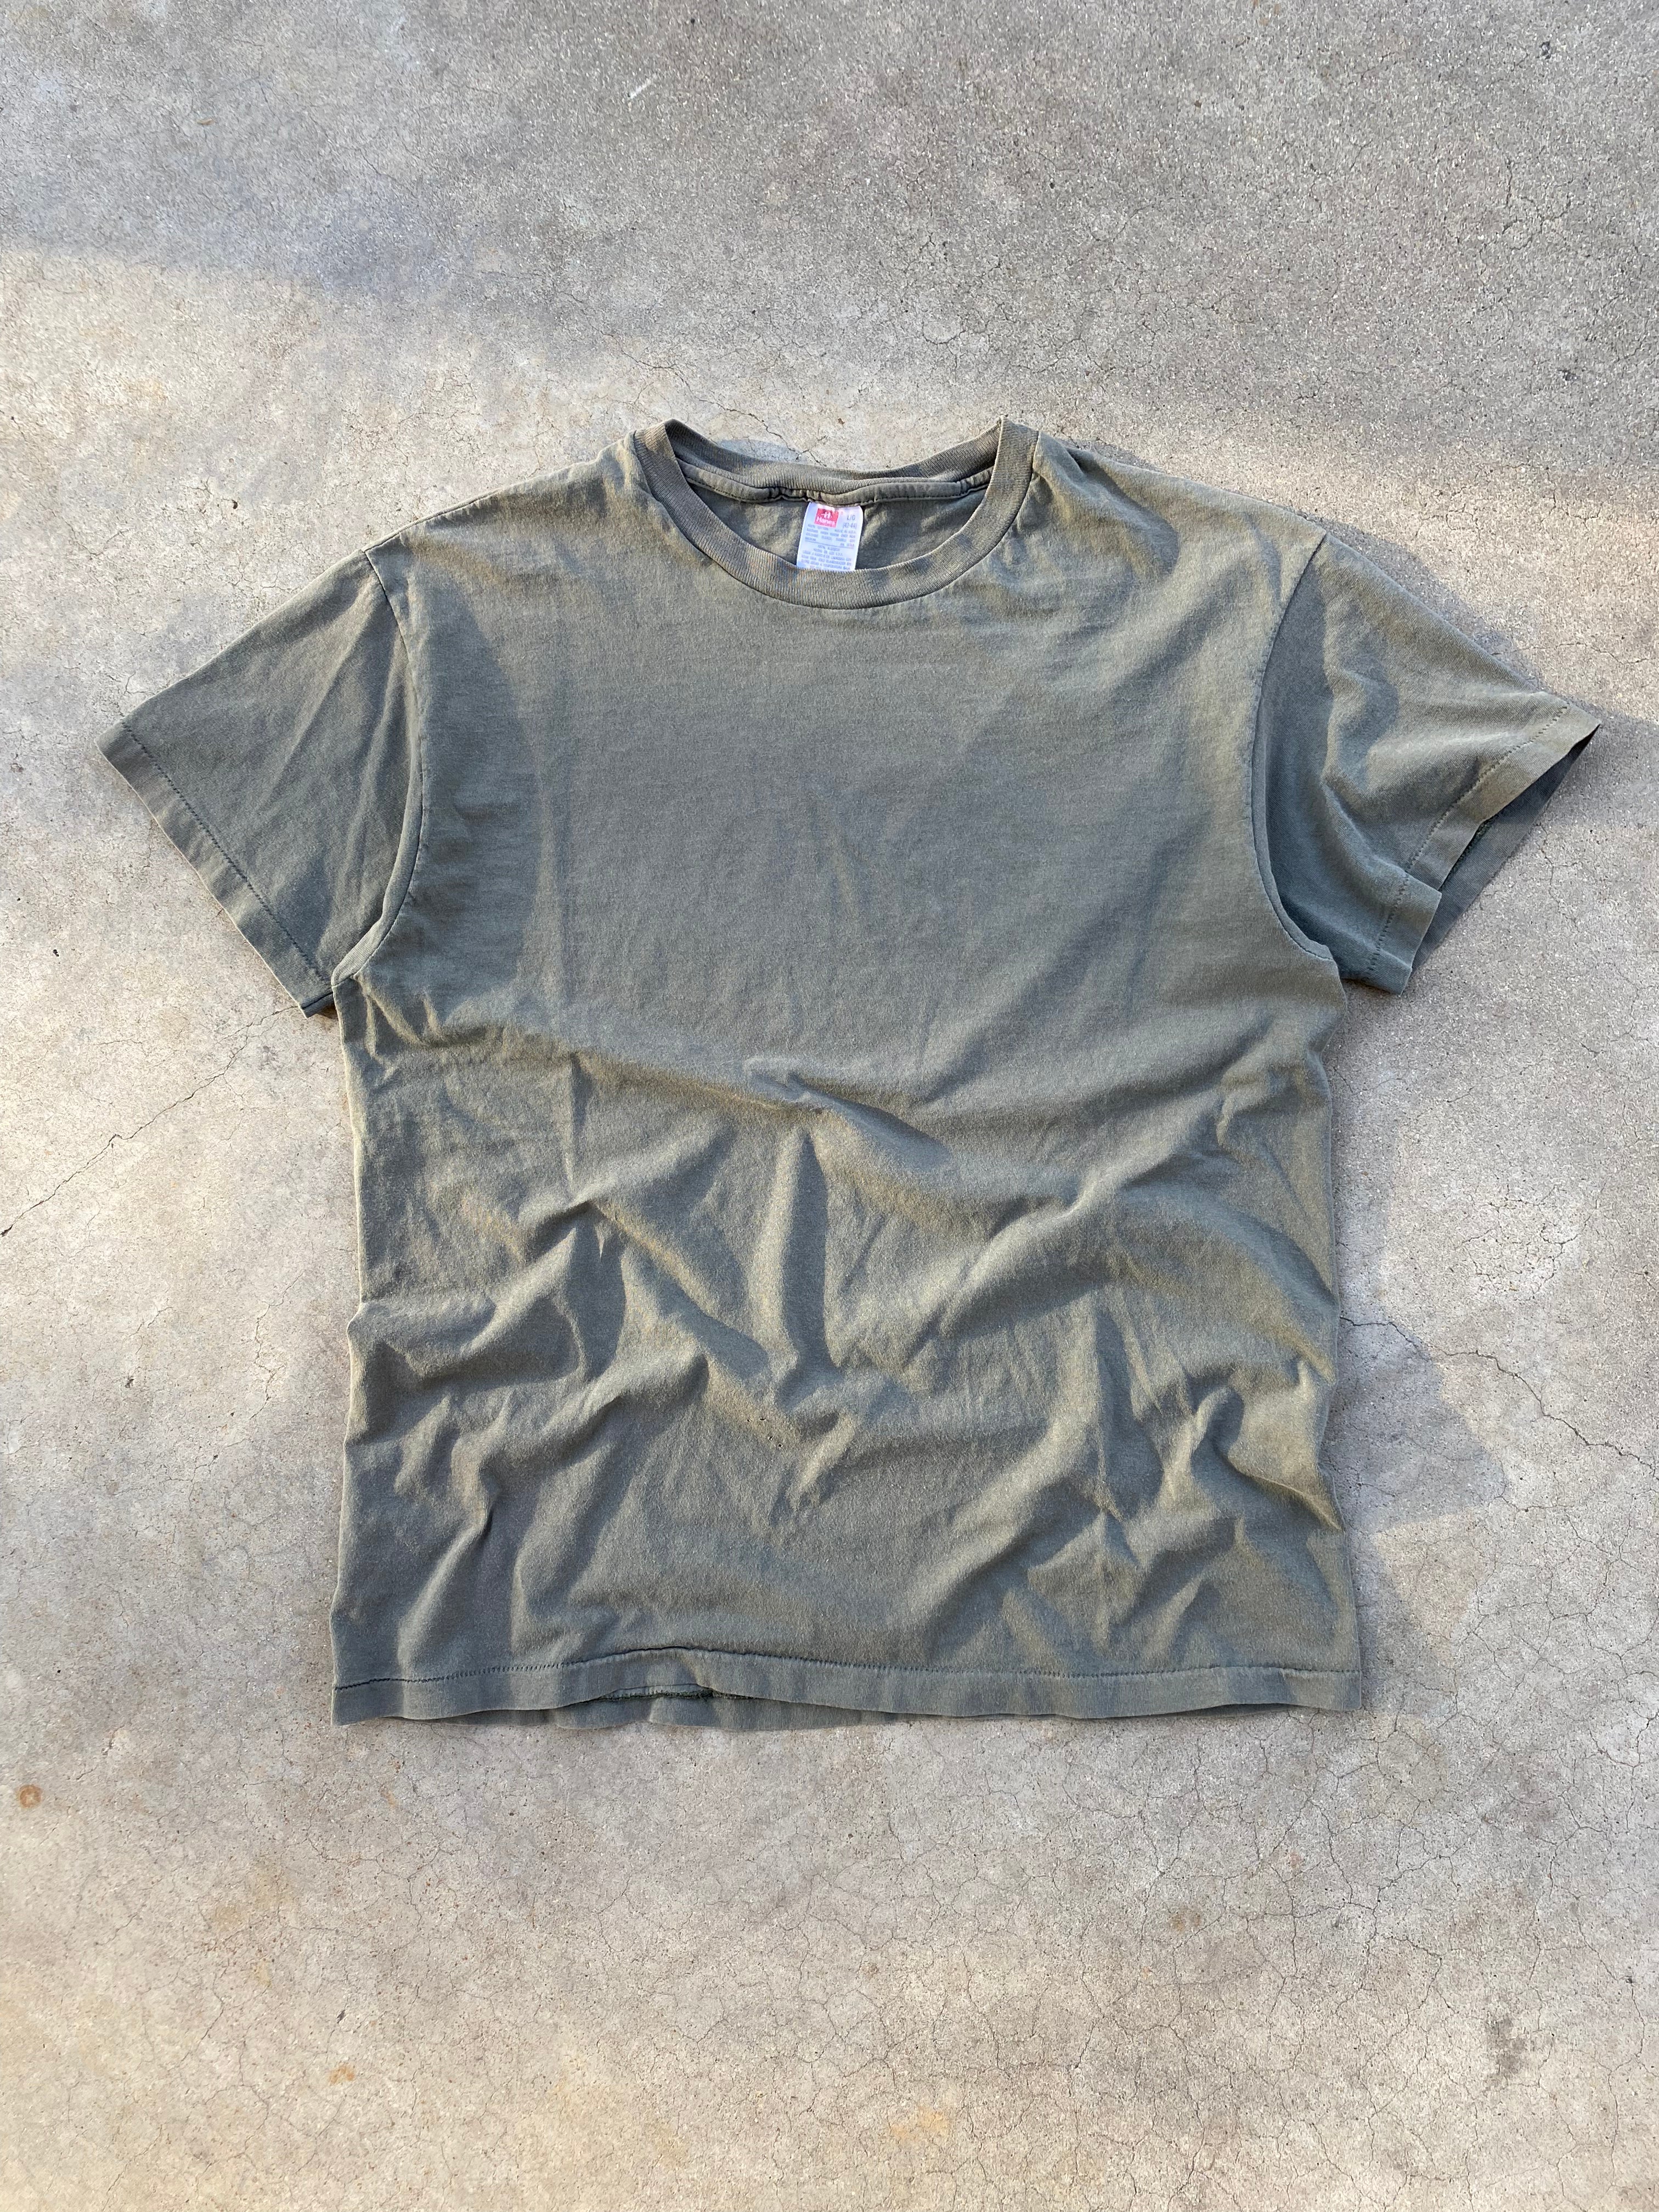 1980s Hanes Faded Blank T-Shirt (M)